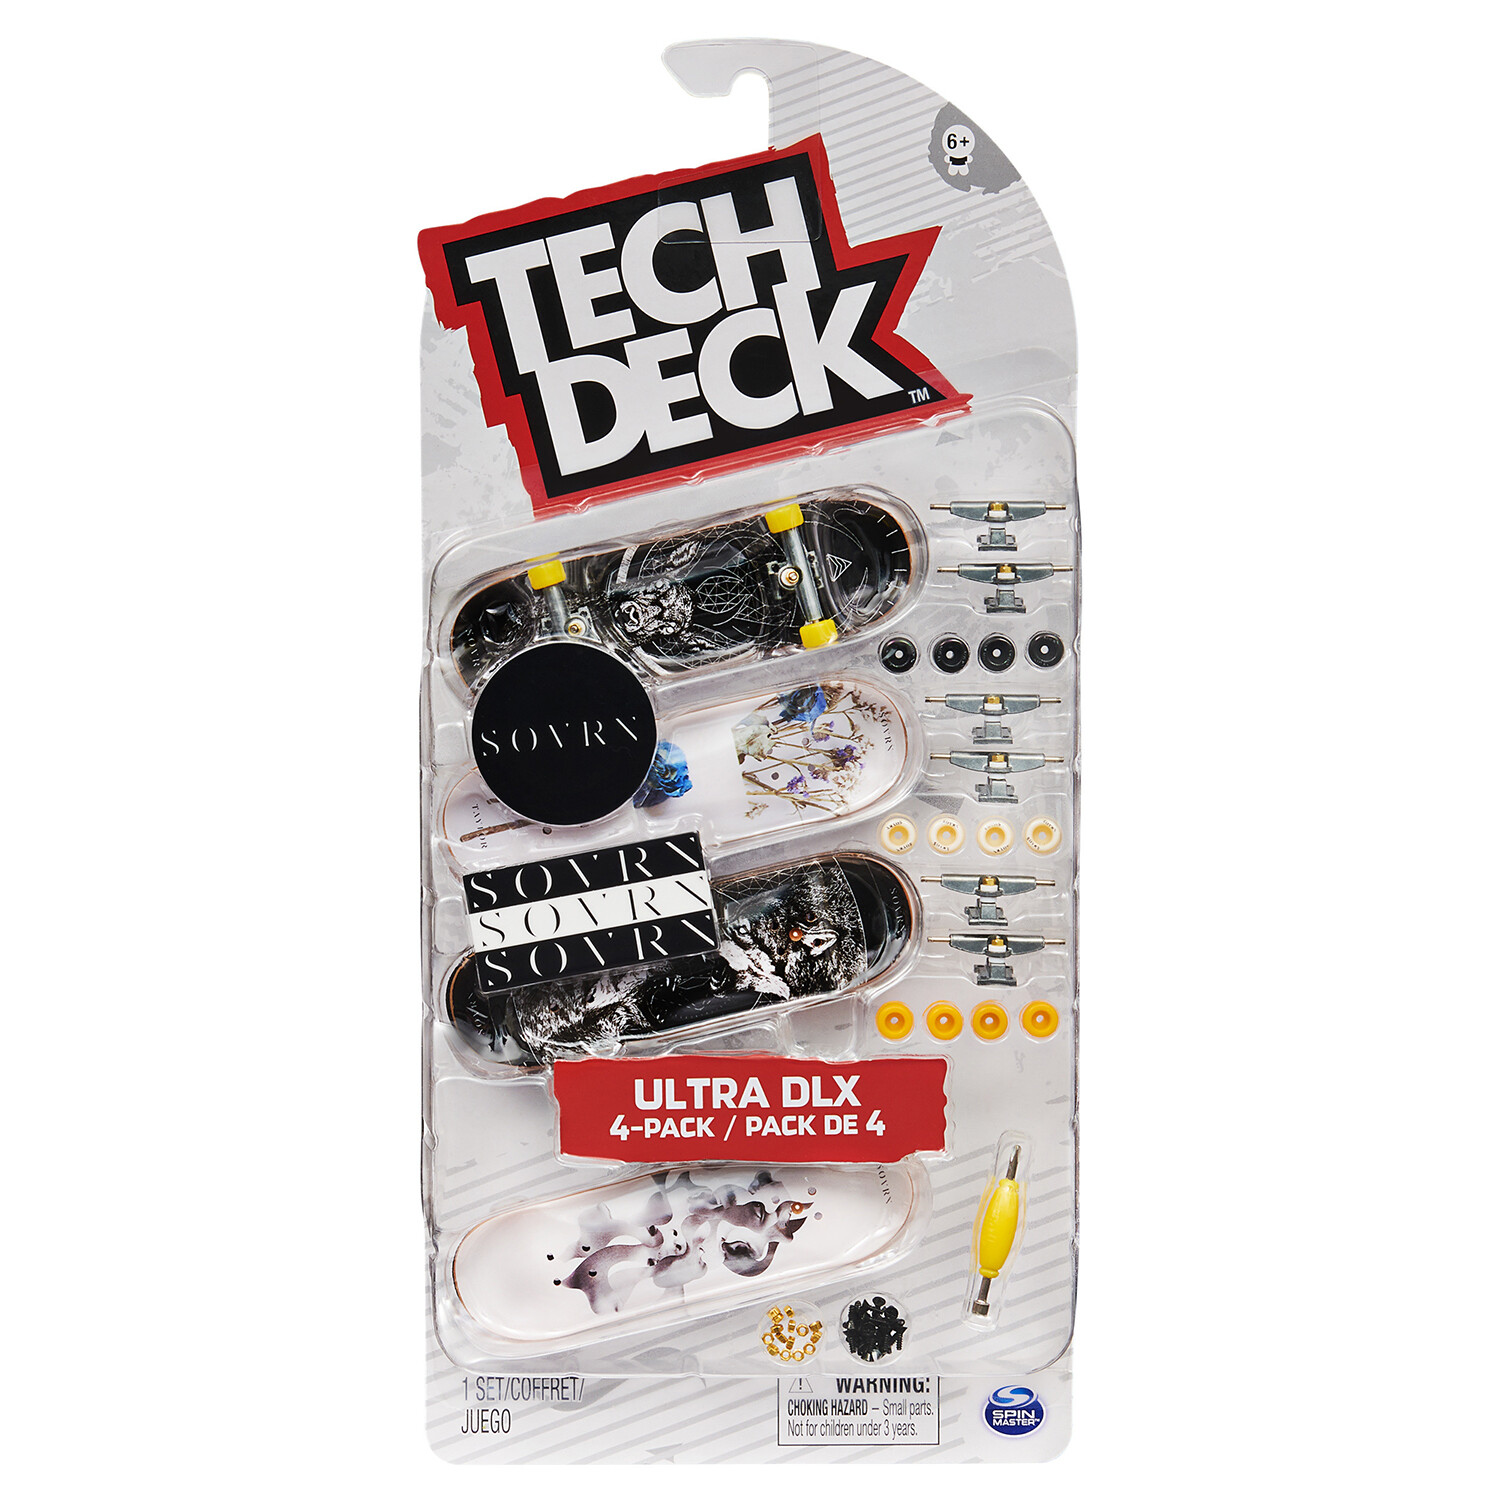 Single Tech Deck Ultra DLX Skateboards Figures 4 Pack in Assorted styles Image 1